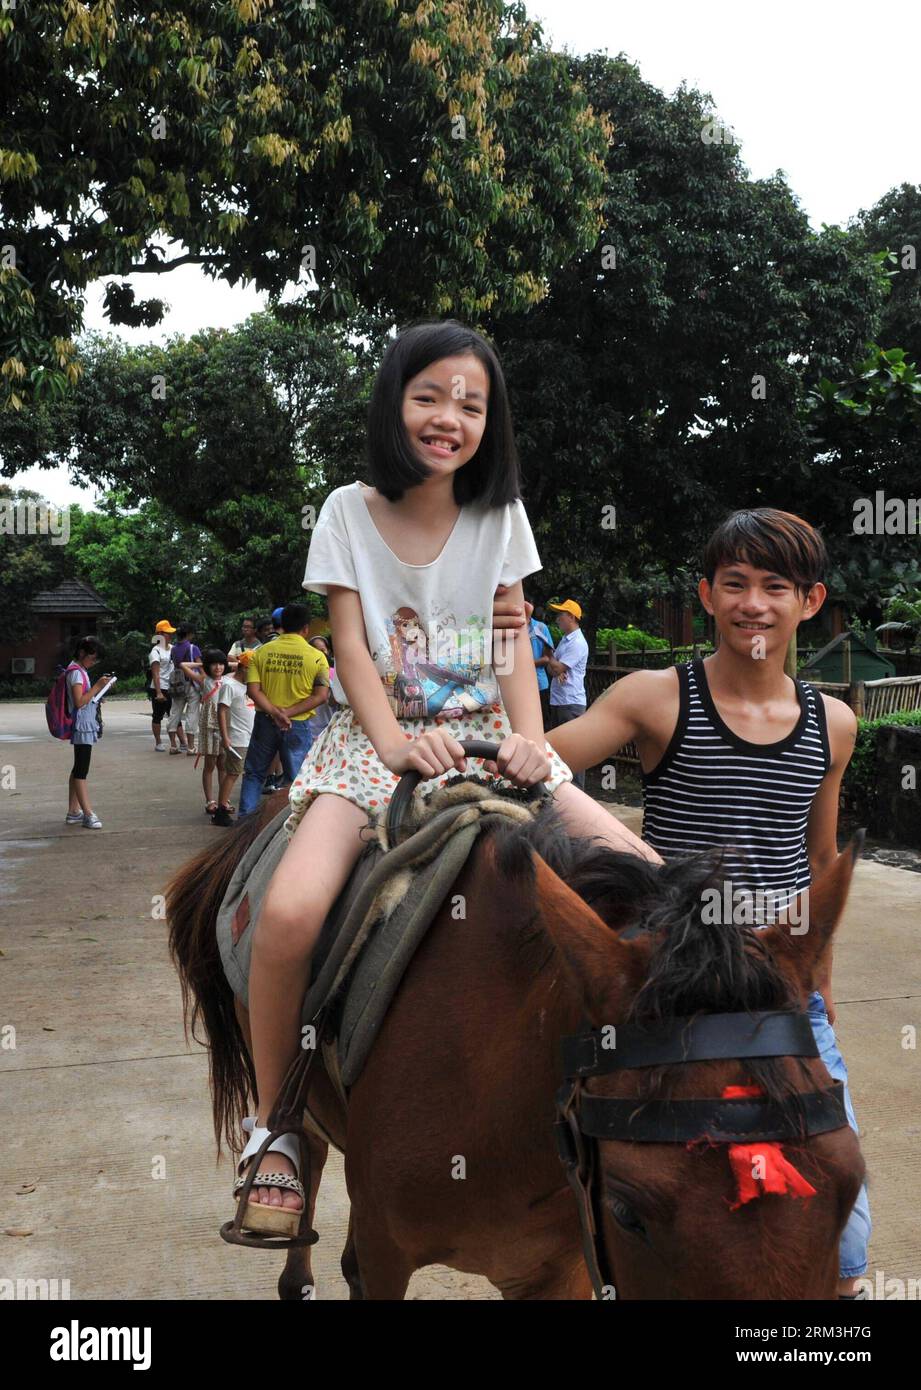 Bildnummer: 60179677  Datum: 24.07.2013  Copyright: imago/Xinhua (130724) -- HAIKOU, July 24, 2013 (Xinhua) -- A girl rides horse during a summer camp at a farm in Haikou, capital of south China s Hainan Province, July 24, 2013. A total of 40 children took part in the summer camp to experience the nature. (Xinhua/Zhou Huimin) (mt) CHINA-HAIKOU-SUMMER CAMP-NATURE (CN) PUBLICATIONxNOTxINxCHN Gesellschaft Sommerlager Feirenlager x0x xsk 2013 hoch      60179677 Date 24 07 2013 Copyright Imago XINHUA  Haikou July 24 2013 XINHUA a Girl Rides Horse during a Summer Camp AT a Farm in Haikou Capital of Stock Photo